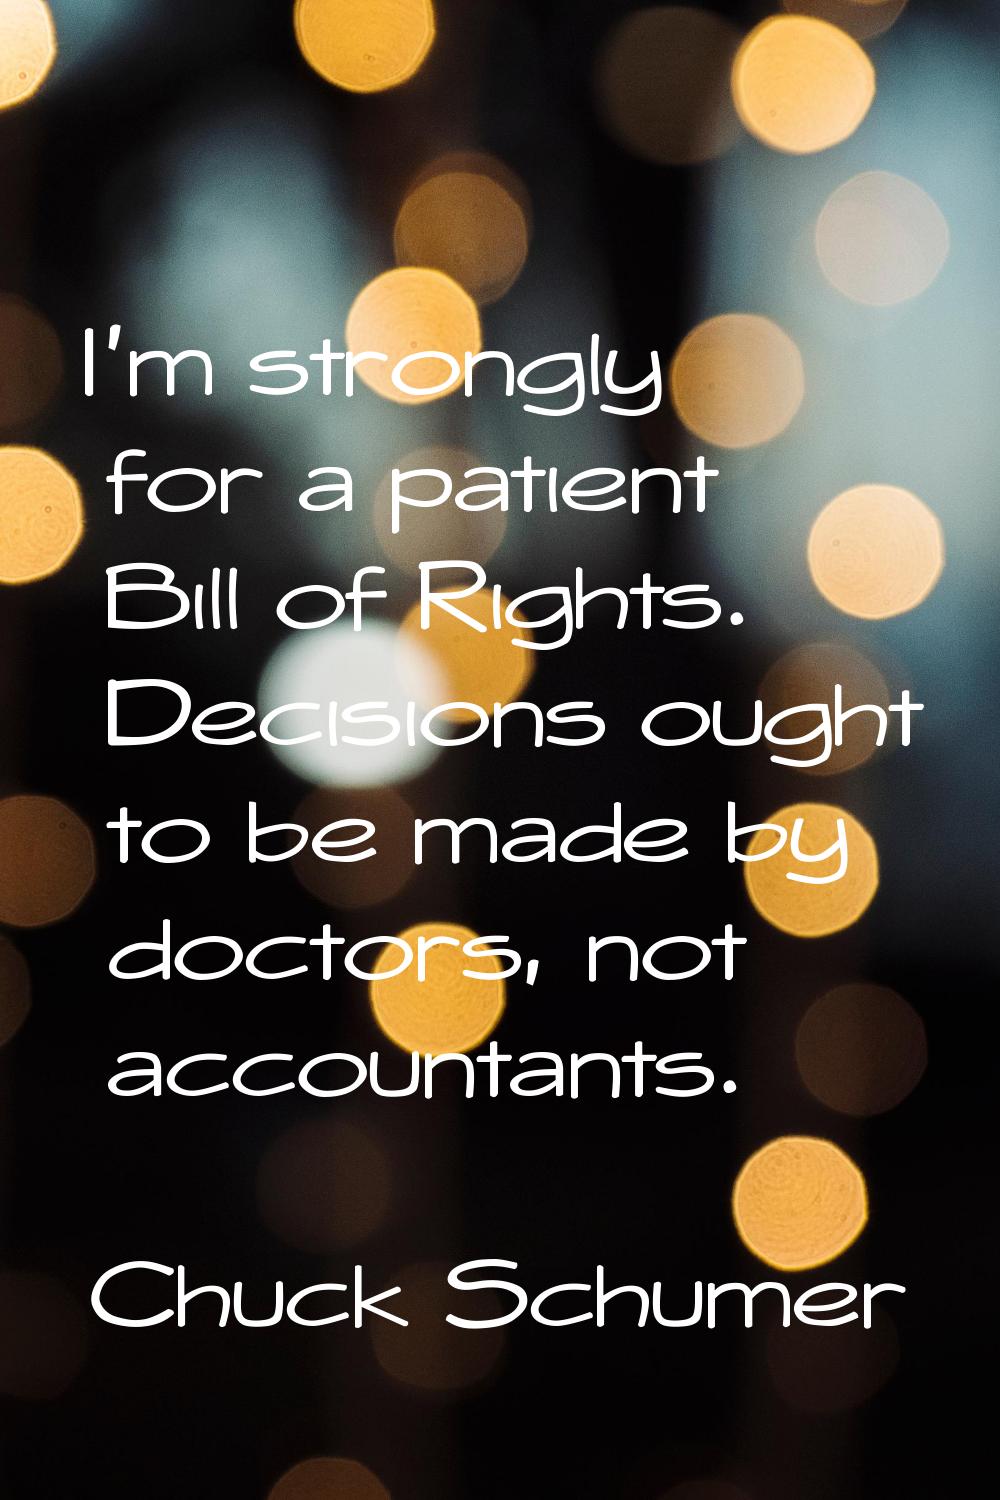 I'm strongly for a patient Bill of Rights. Decisions ought to be made by doctors, not accountants.